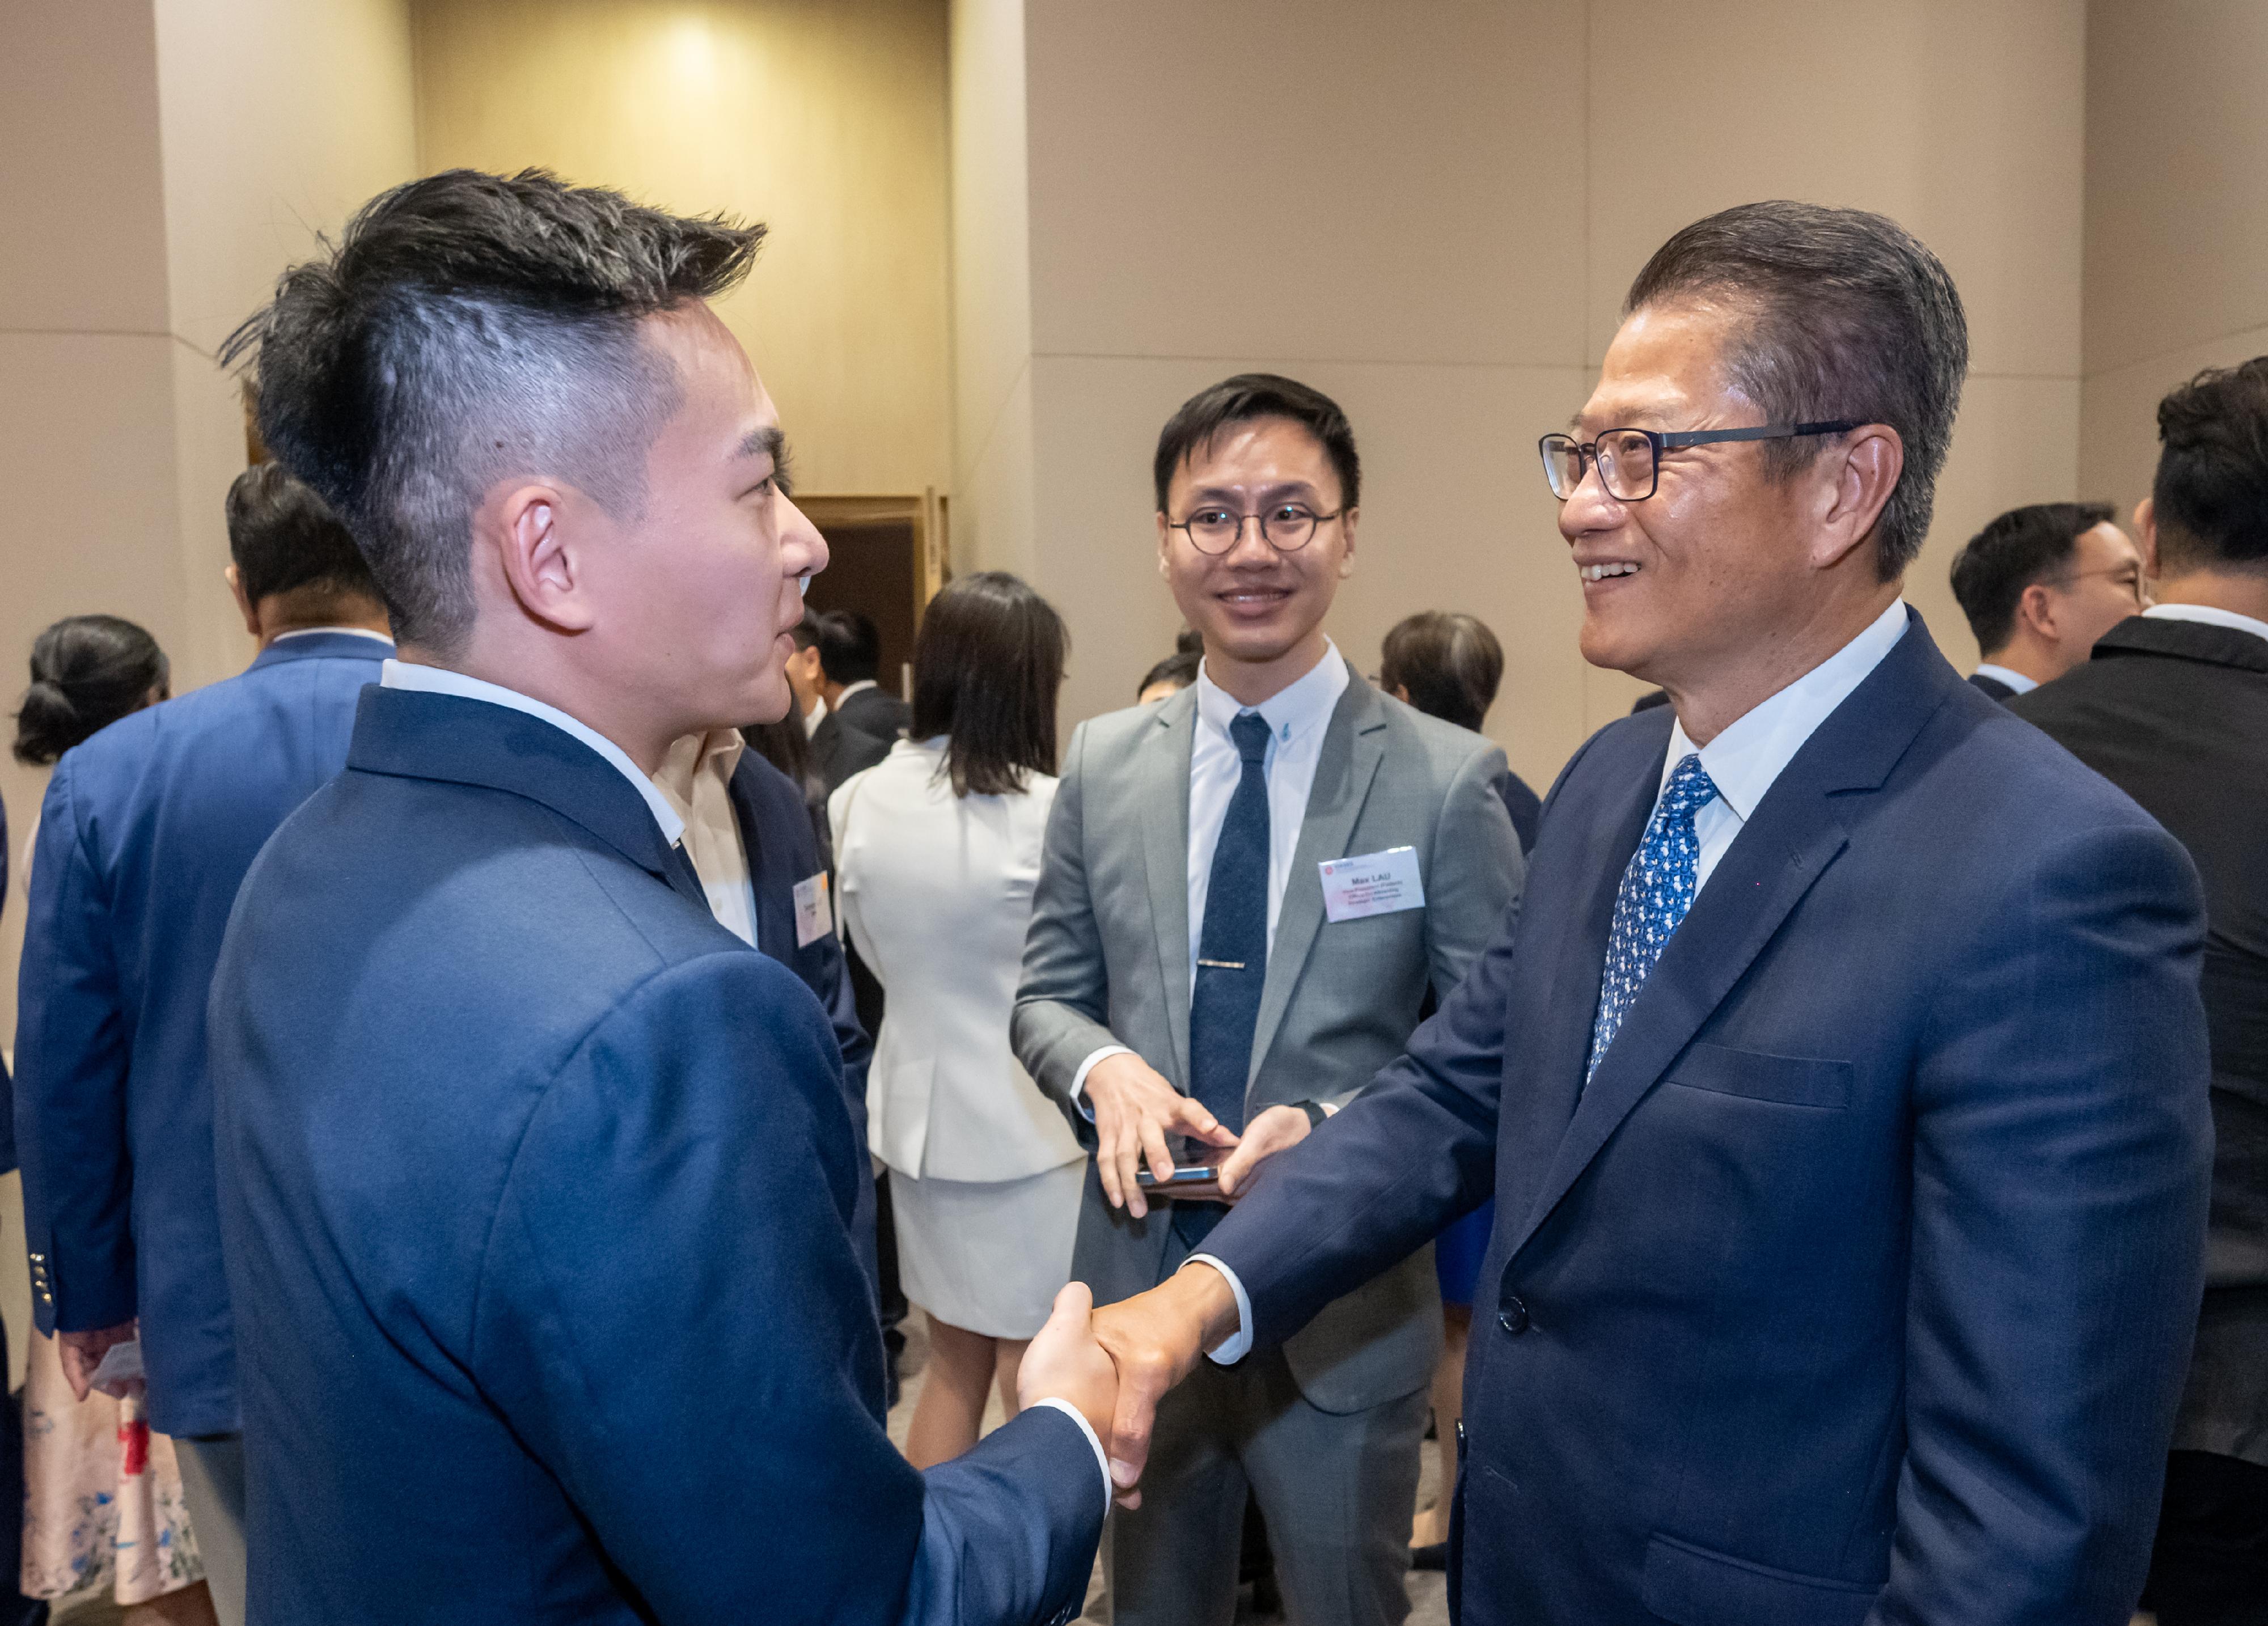 The Office for Attracting Attracting Strategic Enterprises (OASES) held the Launching Ceremony of OASES Partnership. Photo shows the Financial Secretary, Mr Paul Chan (first right), interacting with the representatives of strategic enterprises.